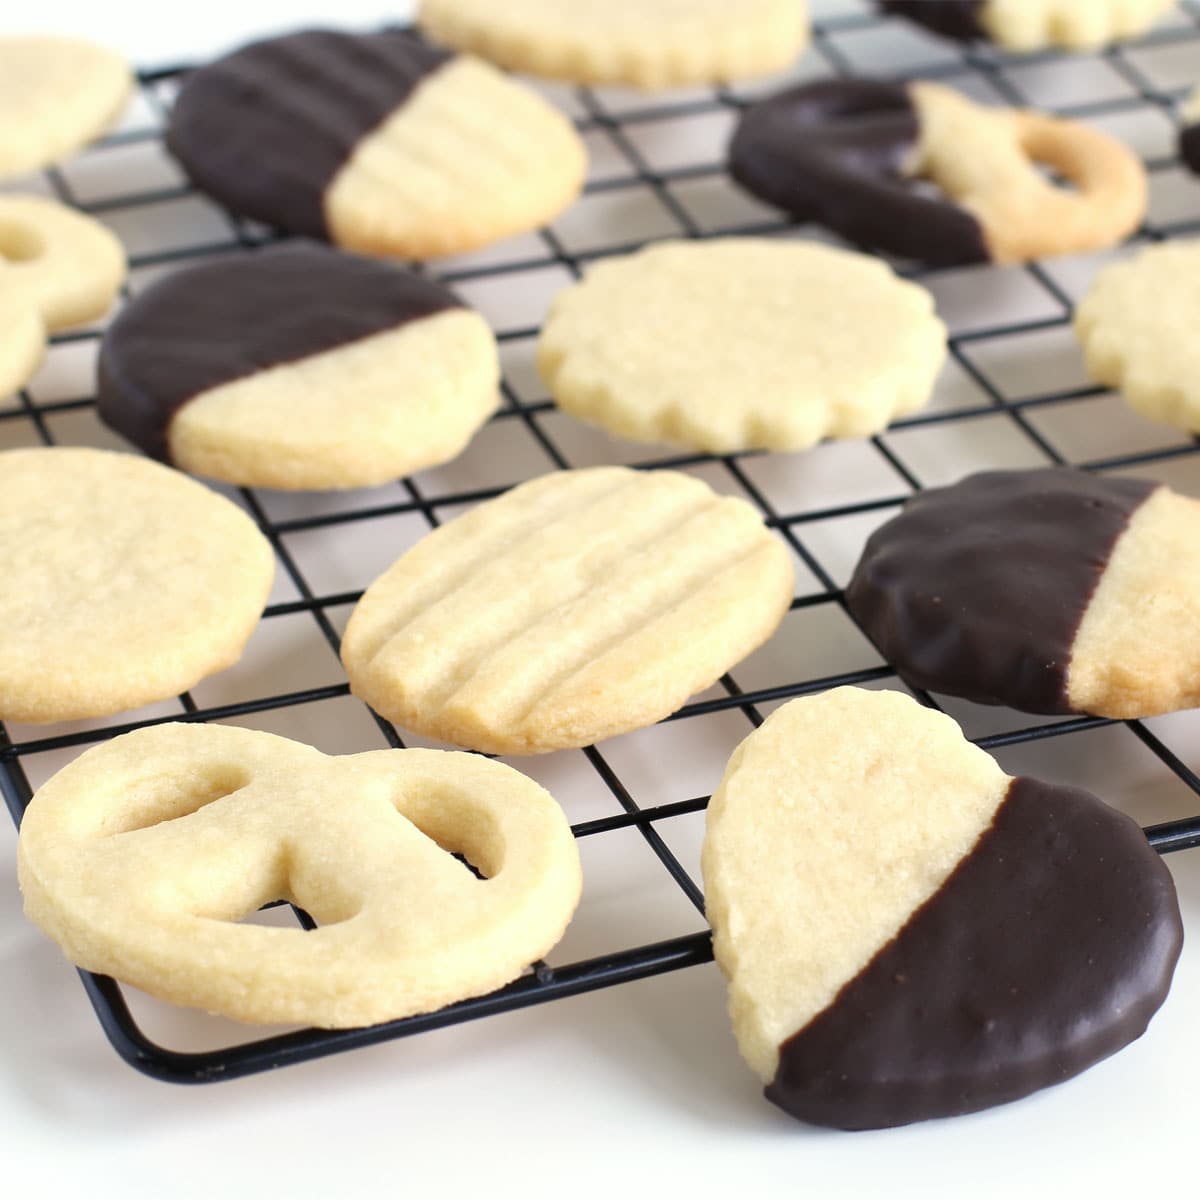 Sable Cookies plain and dipped in chocolate